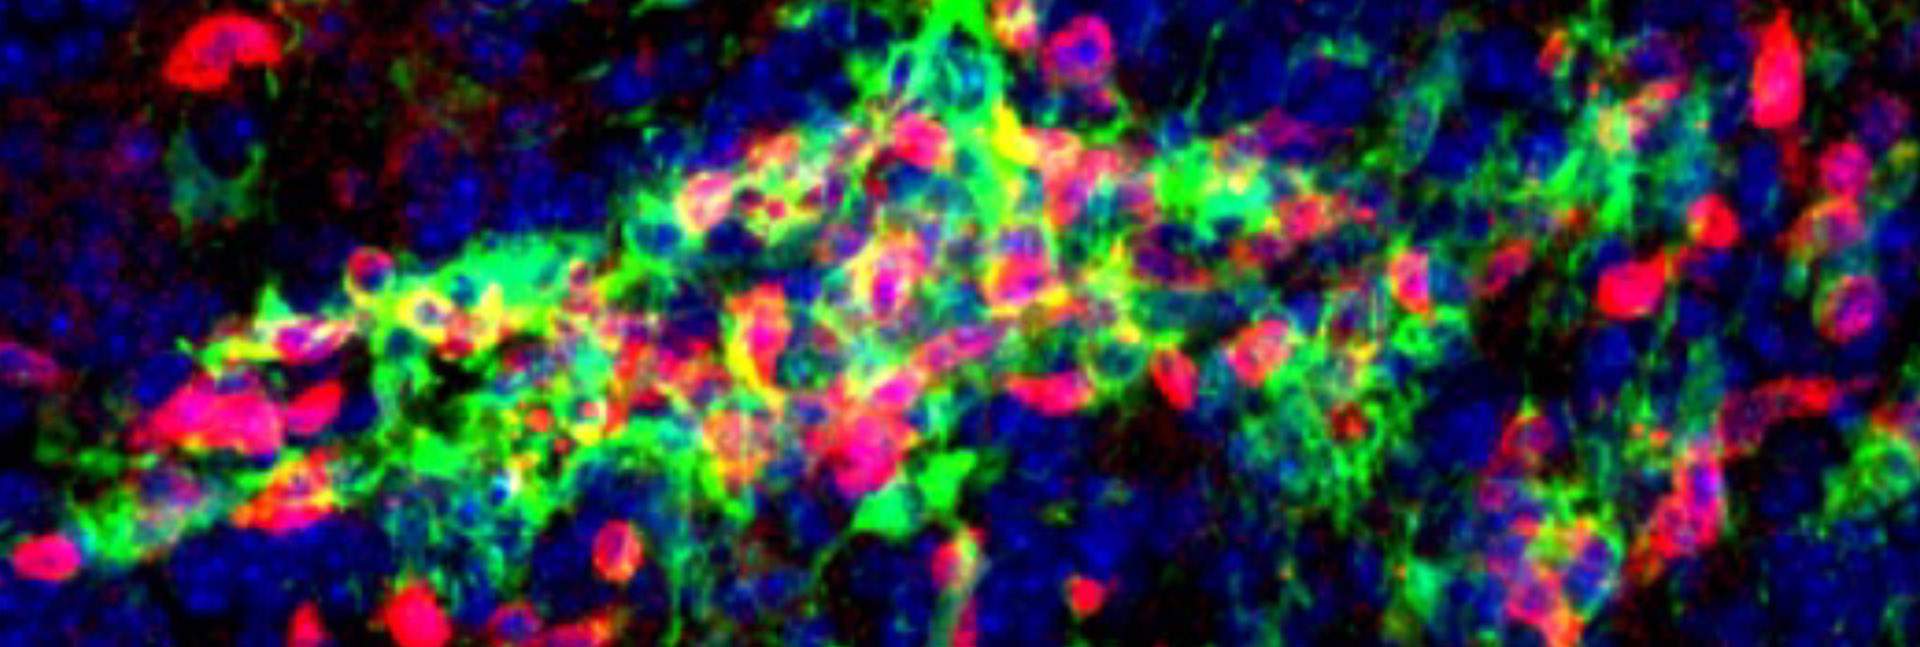 The brain of a mouse with an MS-like disease reveals clusters of microglia (green) and T cells (red)